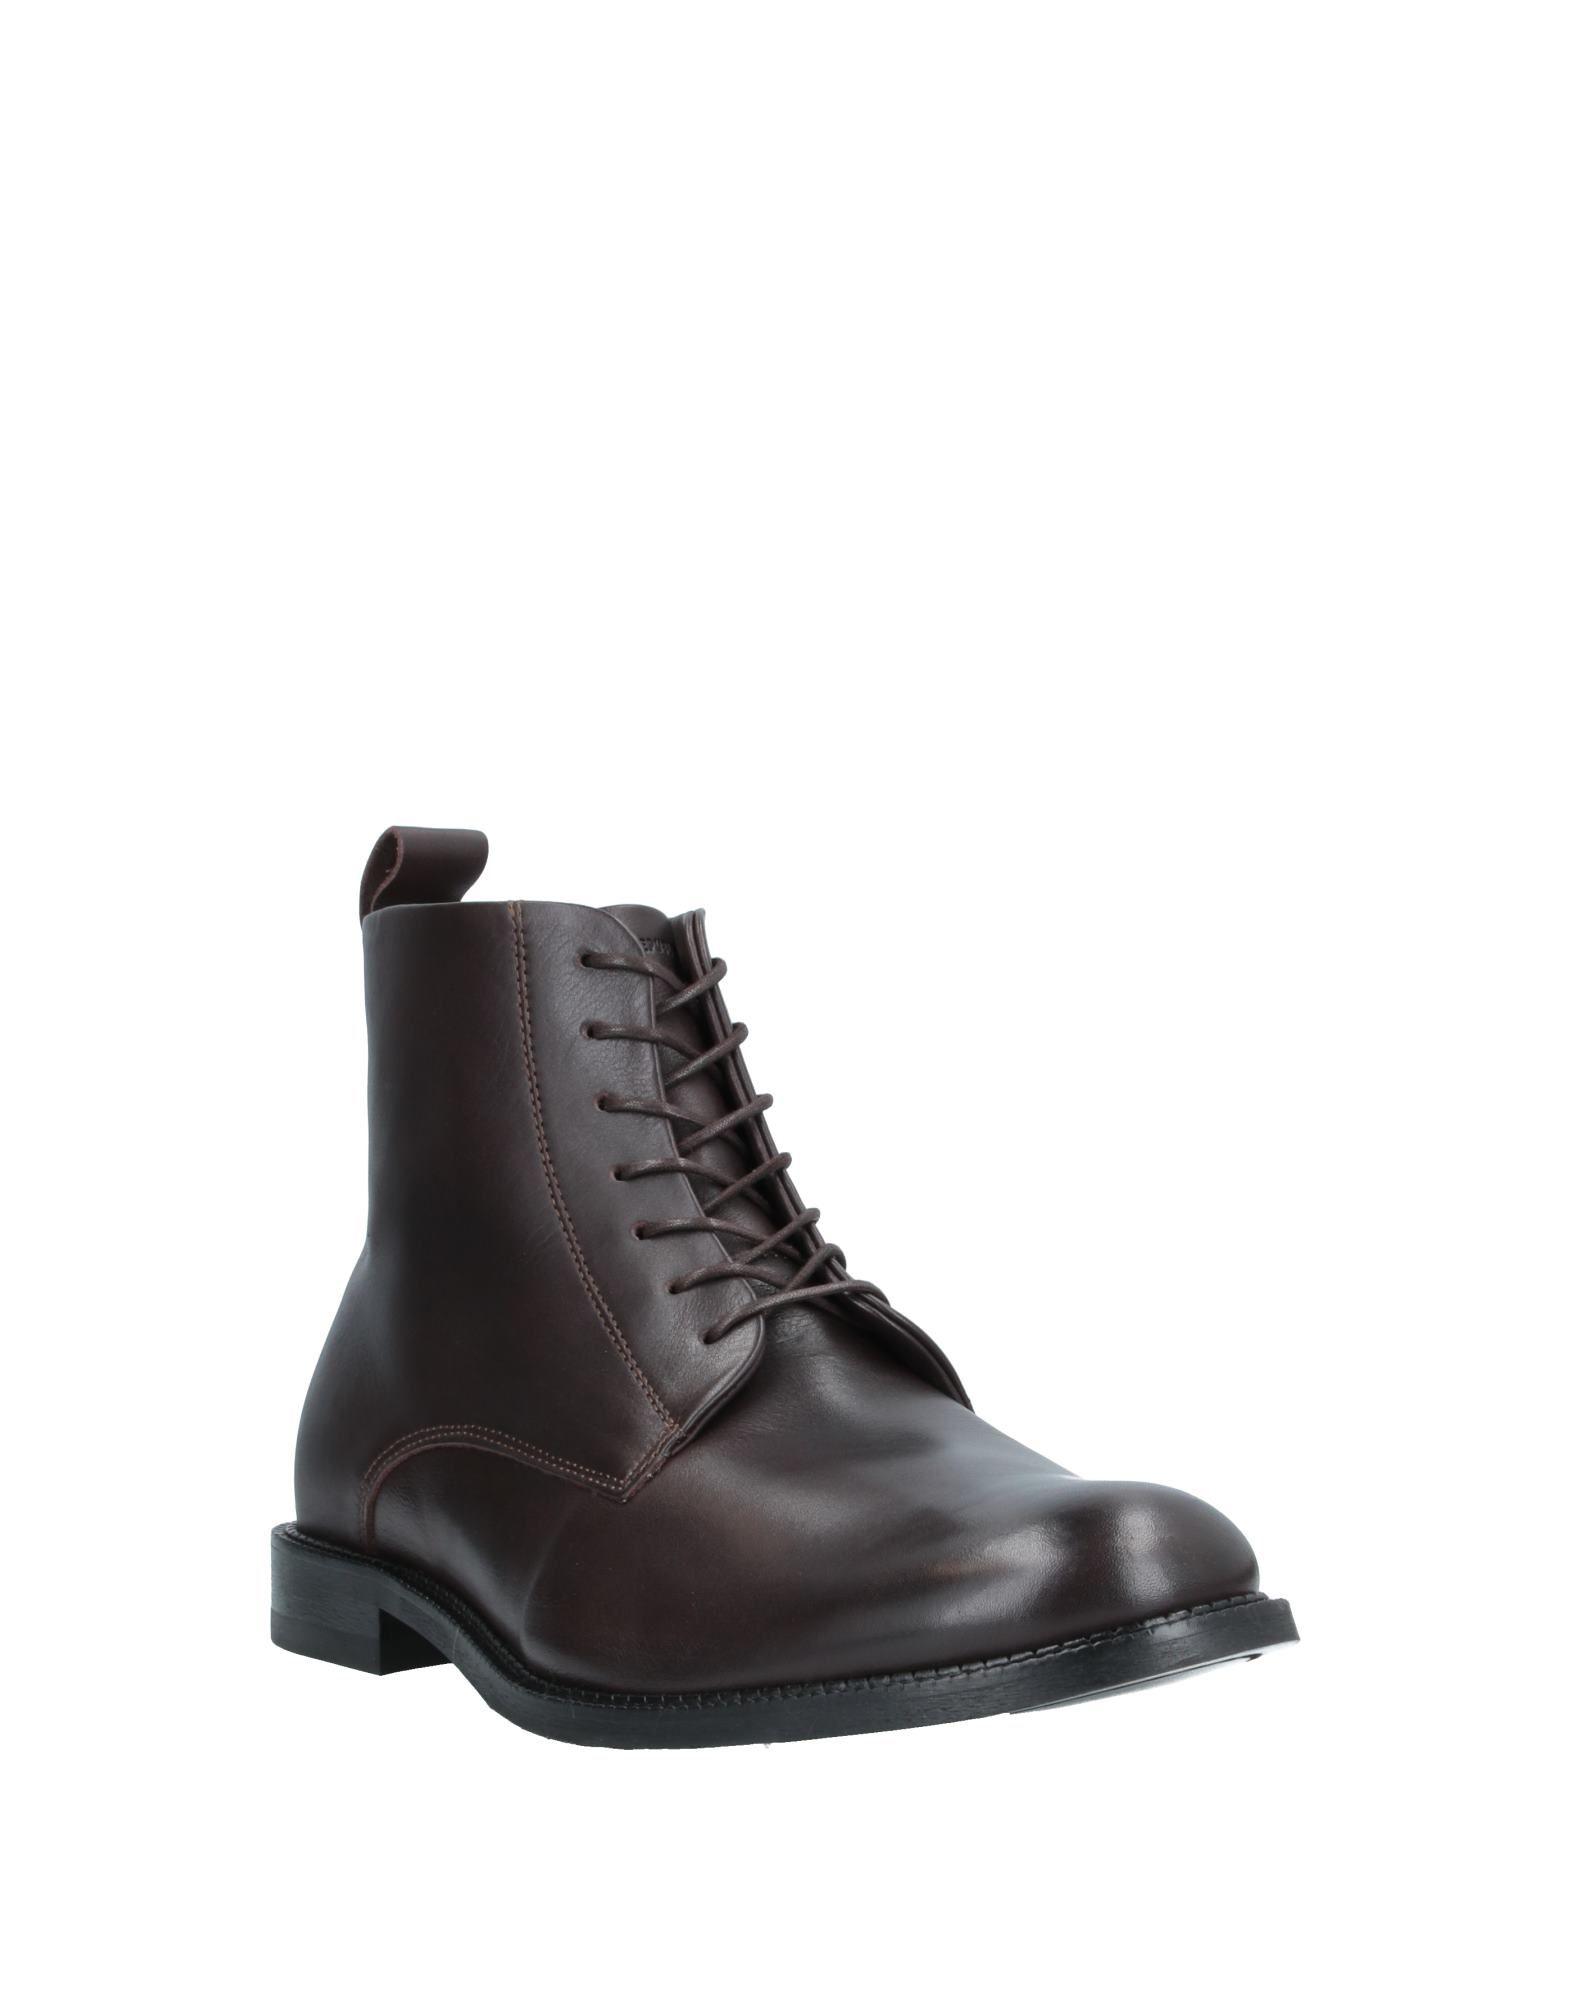 Royal Republiq Leather Ankle Boots in Dark Brown (Brown) for Men - Lyst